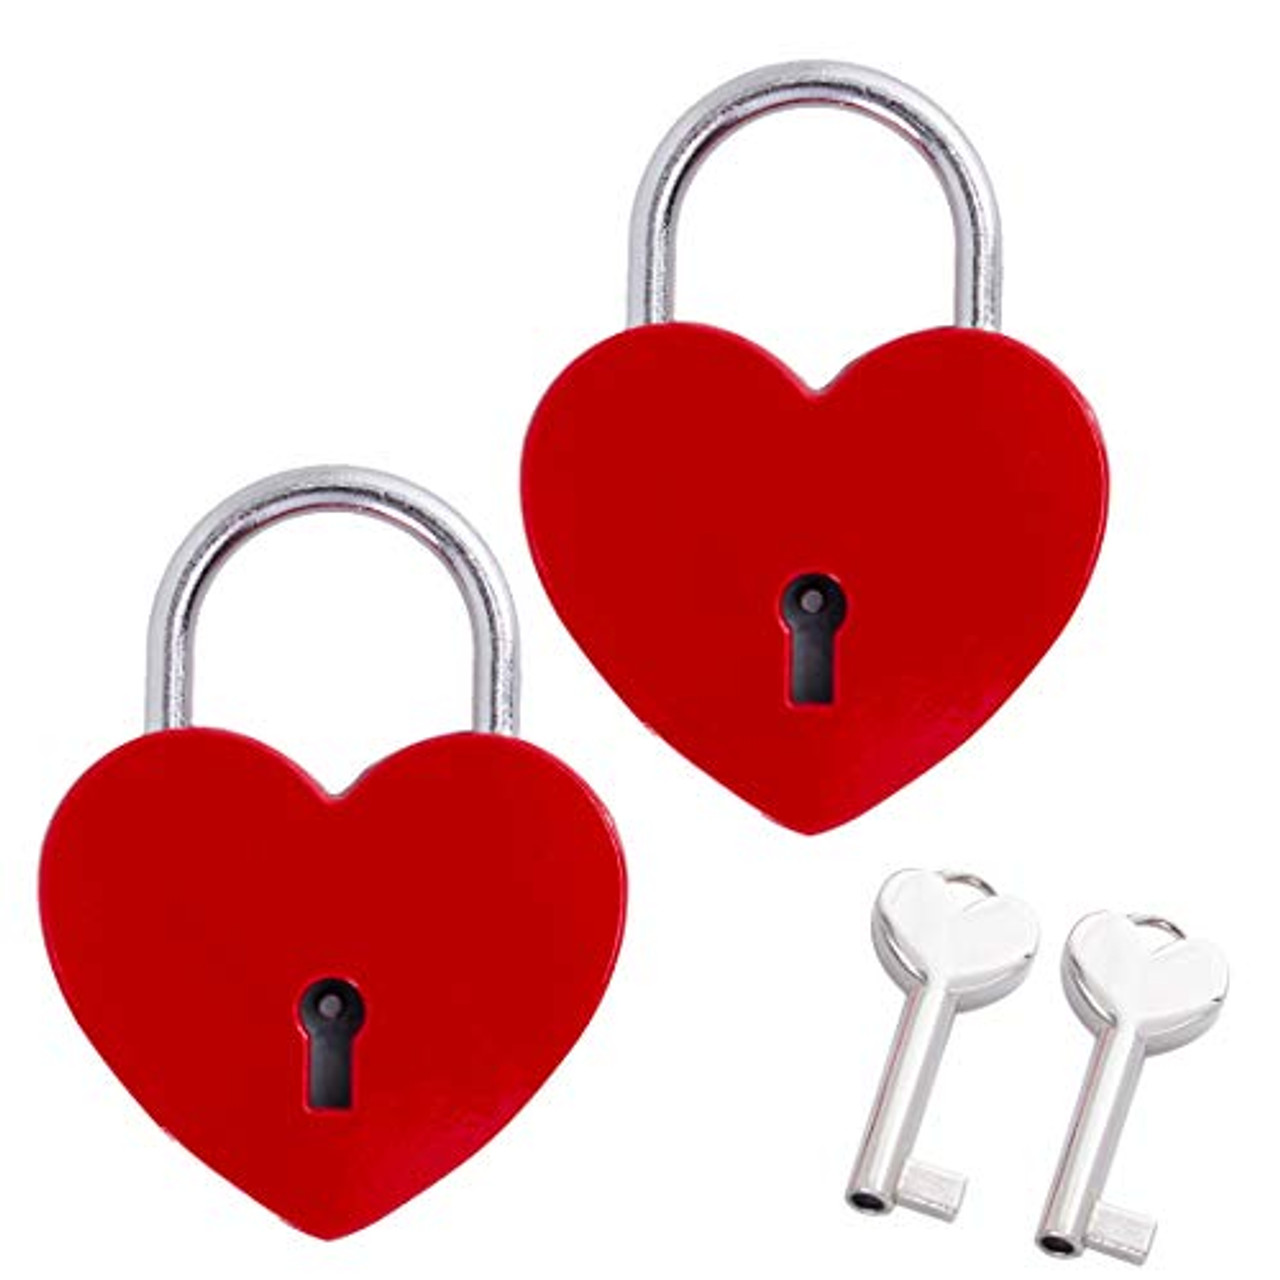 Lock /Padlock for Jewelry Box Luggage or Great Valentine's Day Gift 